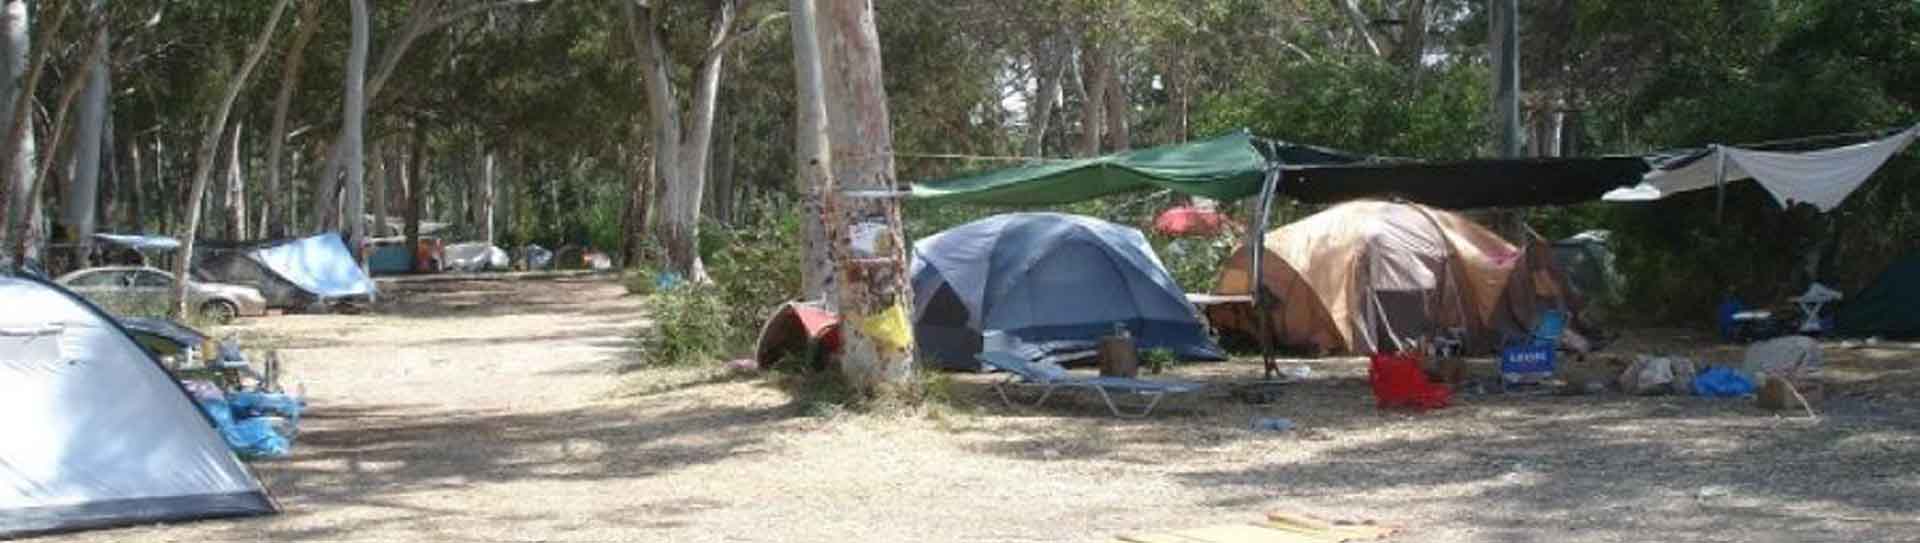 The Polis Camping Site